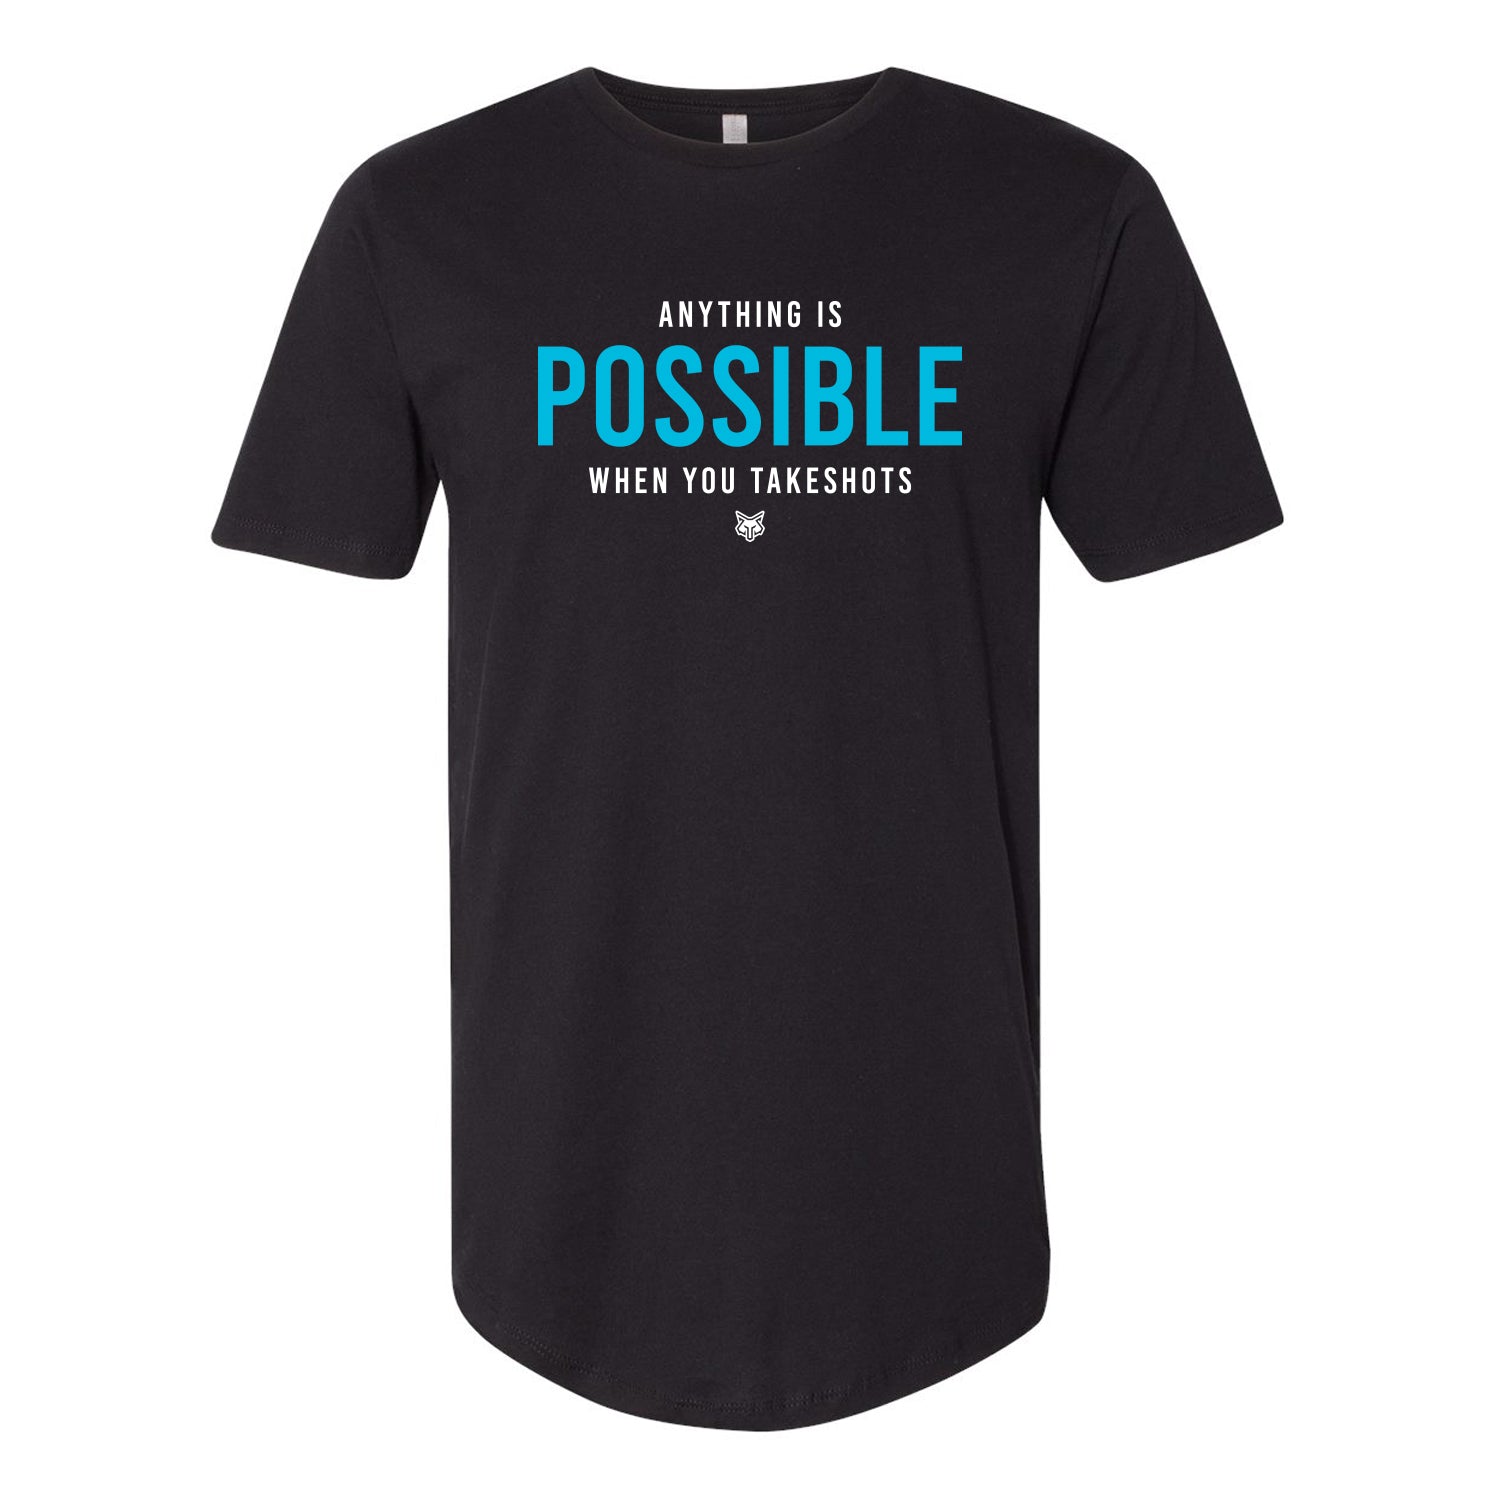 SHIRT MEN - Anything is possible - TakeShots